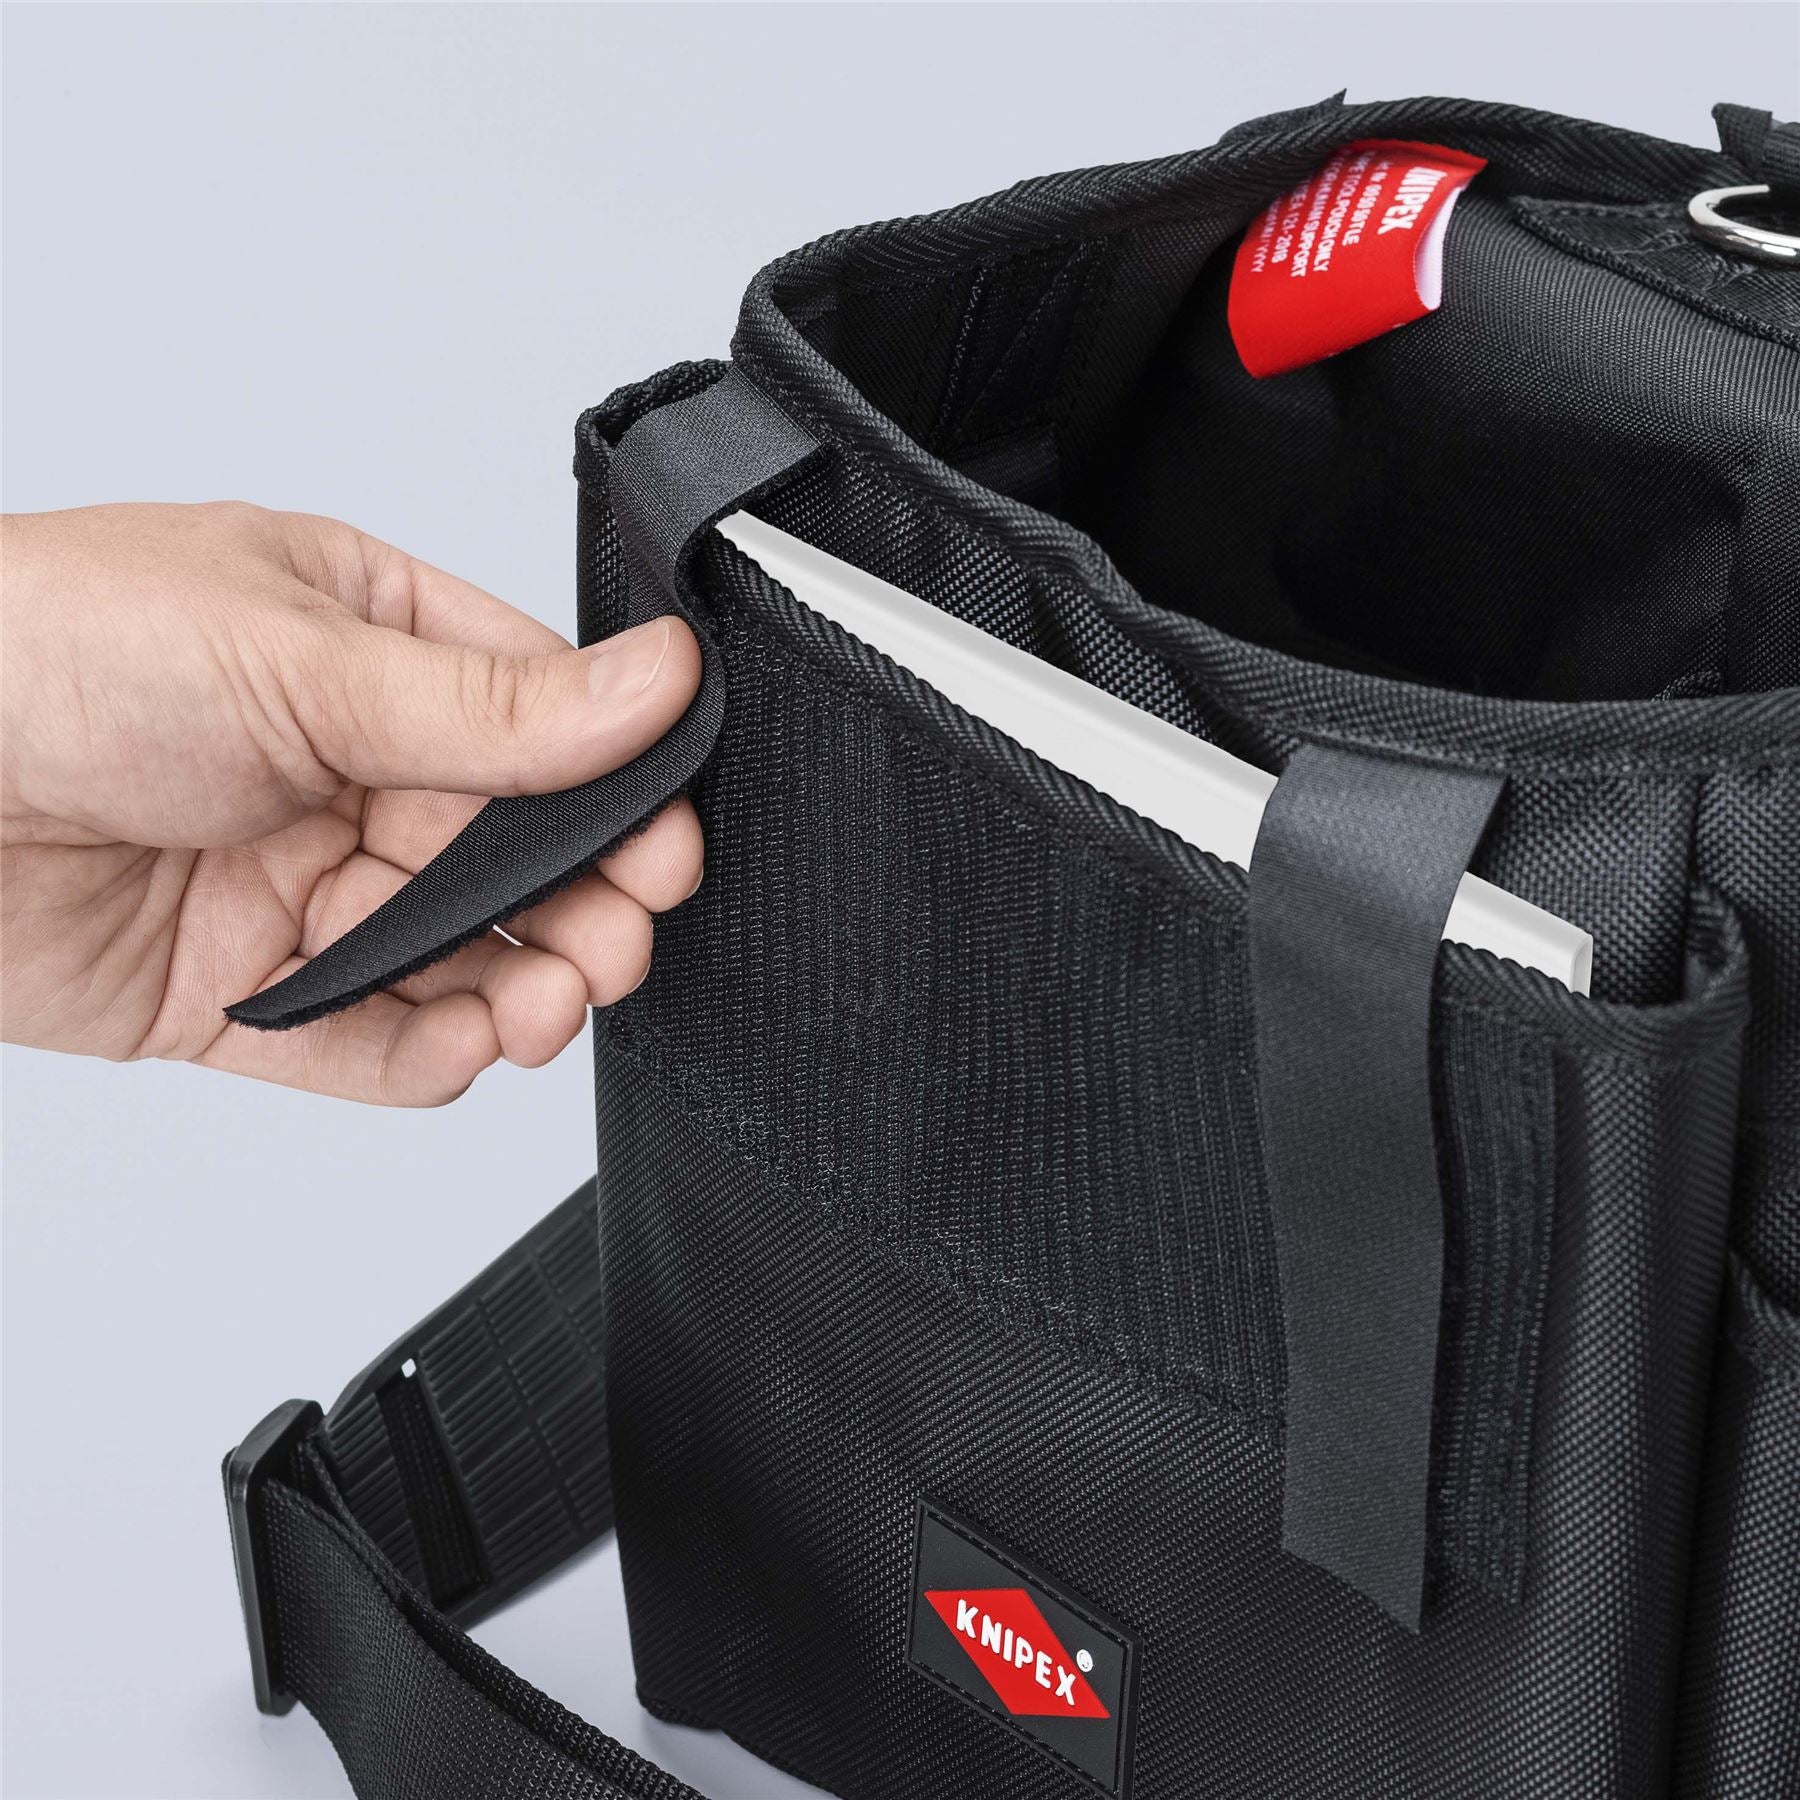 Knipex Tool Bag Case for Working at Heights Small 370 x 250 x 150mm 00 50 50 T LE